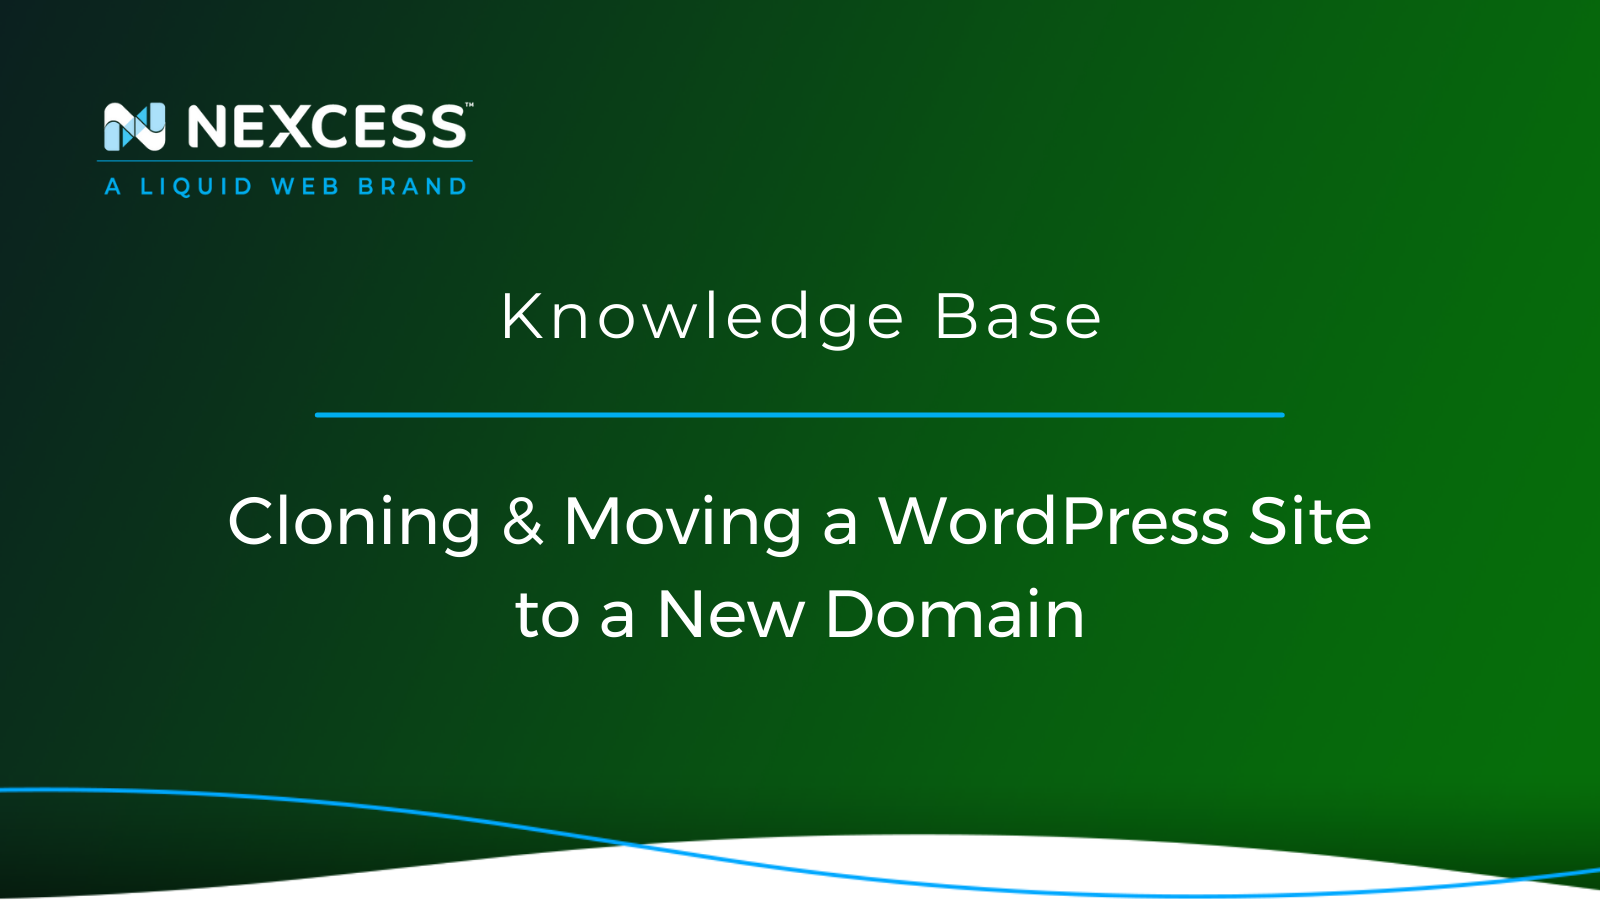 Cloning a WordPress site and Moving it to a New Domain